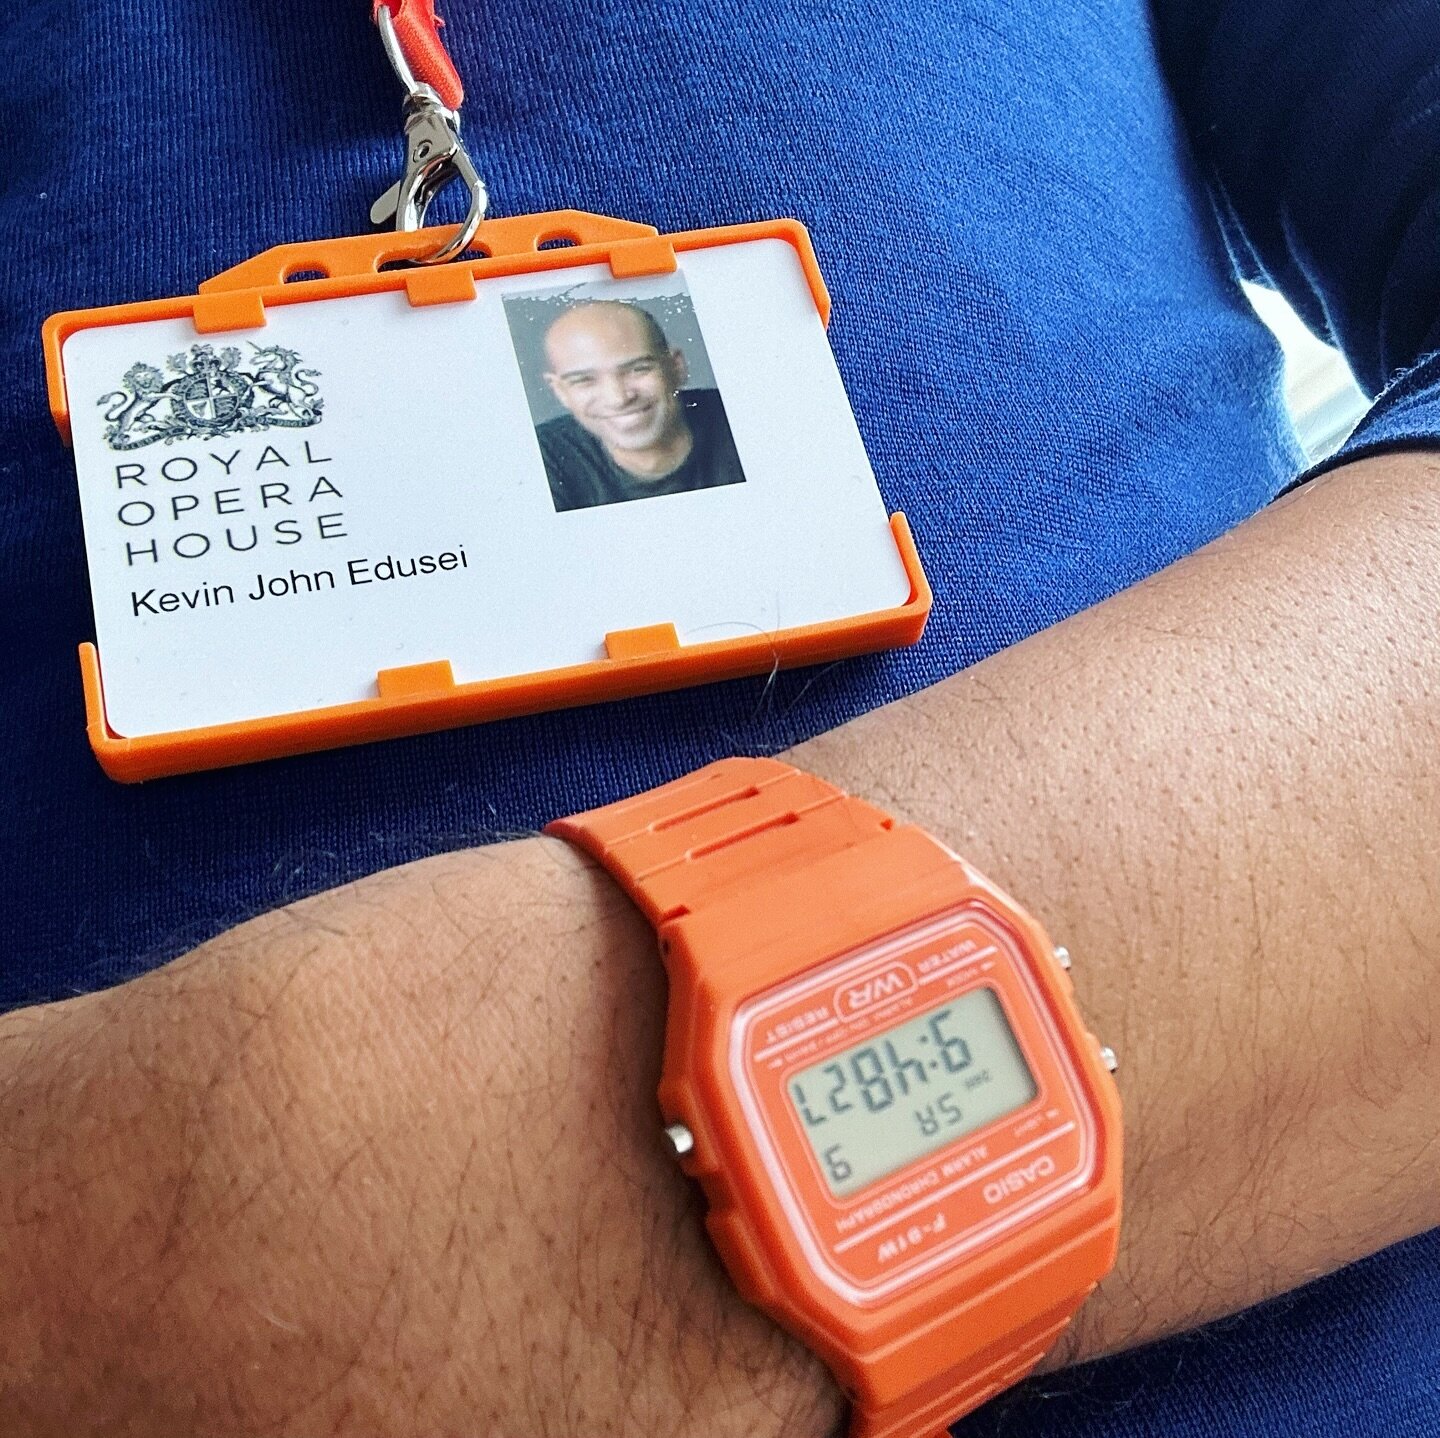 STAGE &amp; ORCHESTRA

Getting ready for the last stage and orchestra rehearsal of Madama Butterfly before the dress on Monday. Love how the colour of my old Casio F-91W matches my @royaloperahouse badge.

#stage #orchestra #opera #puccini #madamabut